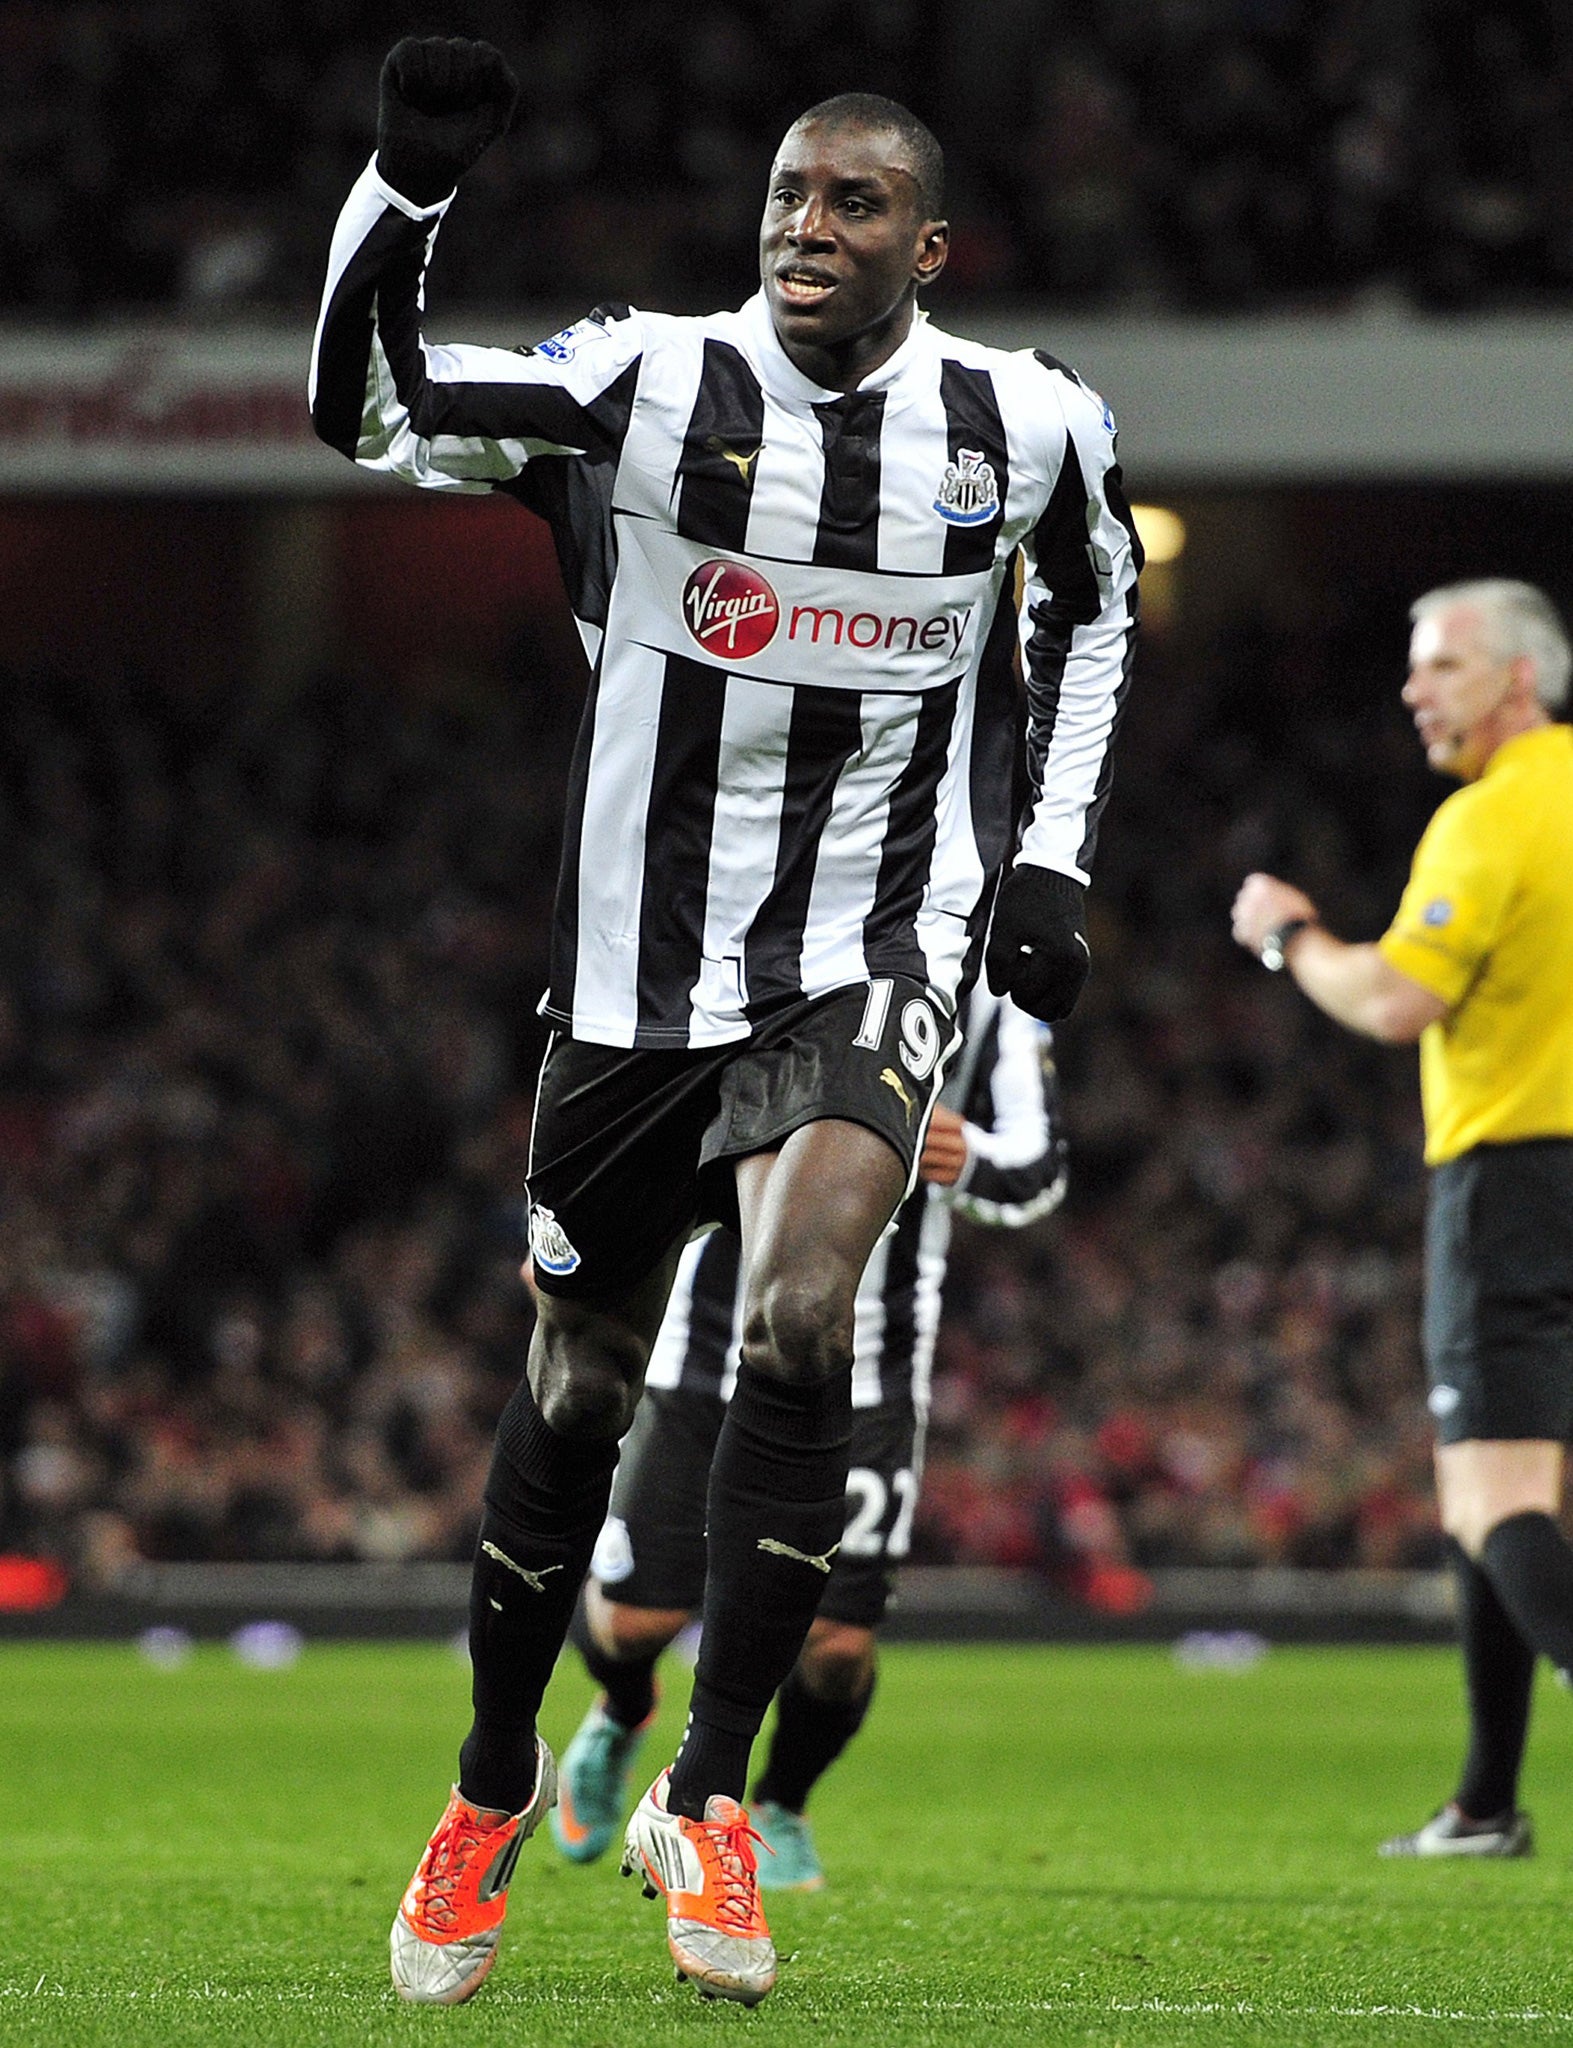 Getting turned down by Gillingham and Barnsley fired the in-demand Demba Ba's desire to shine in the Premier League